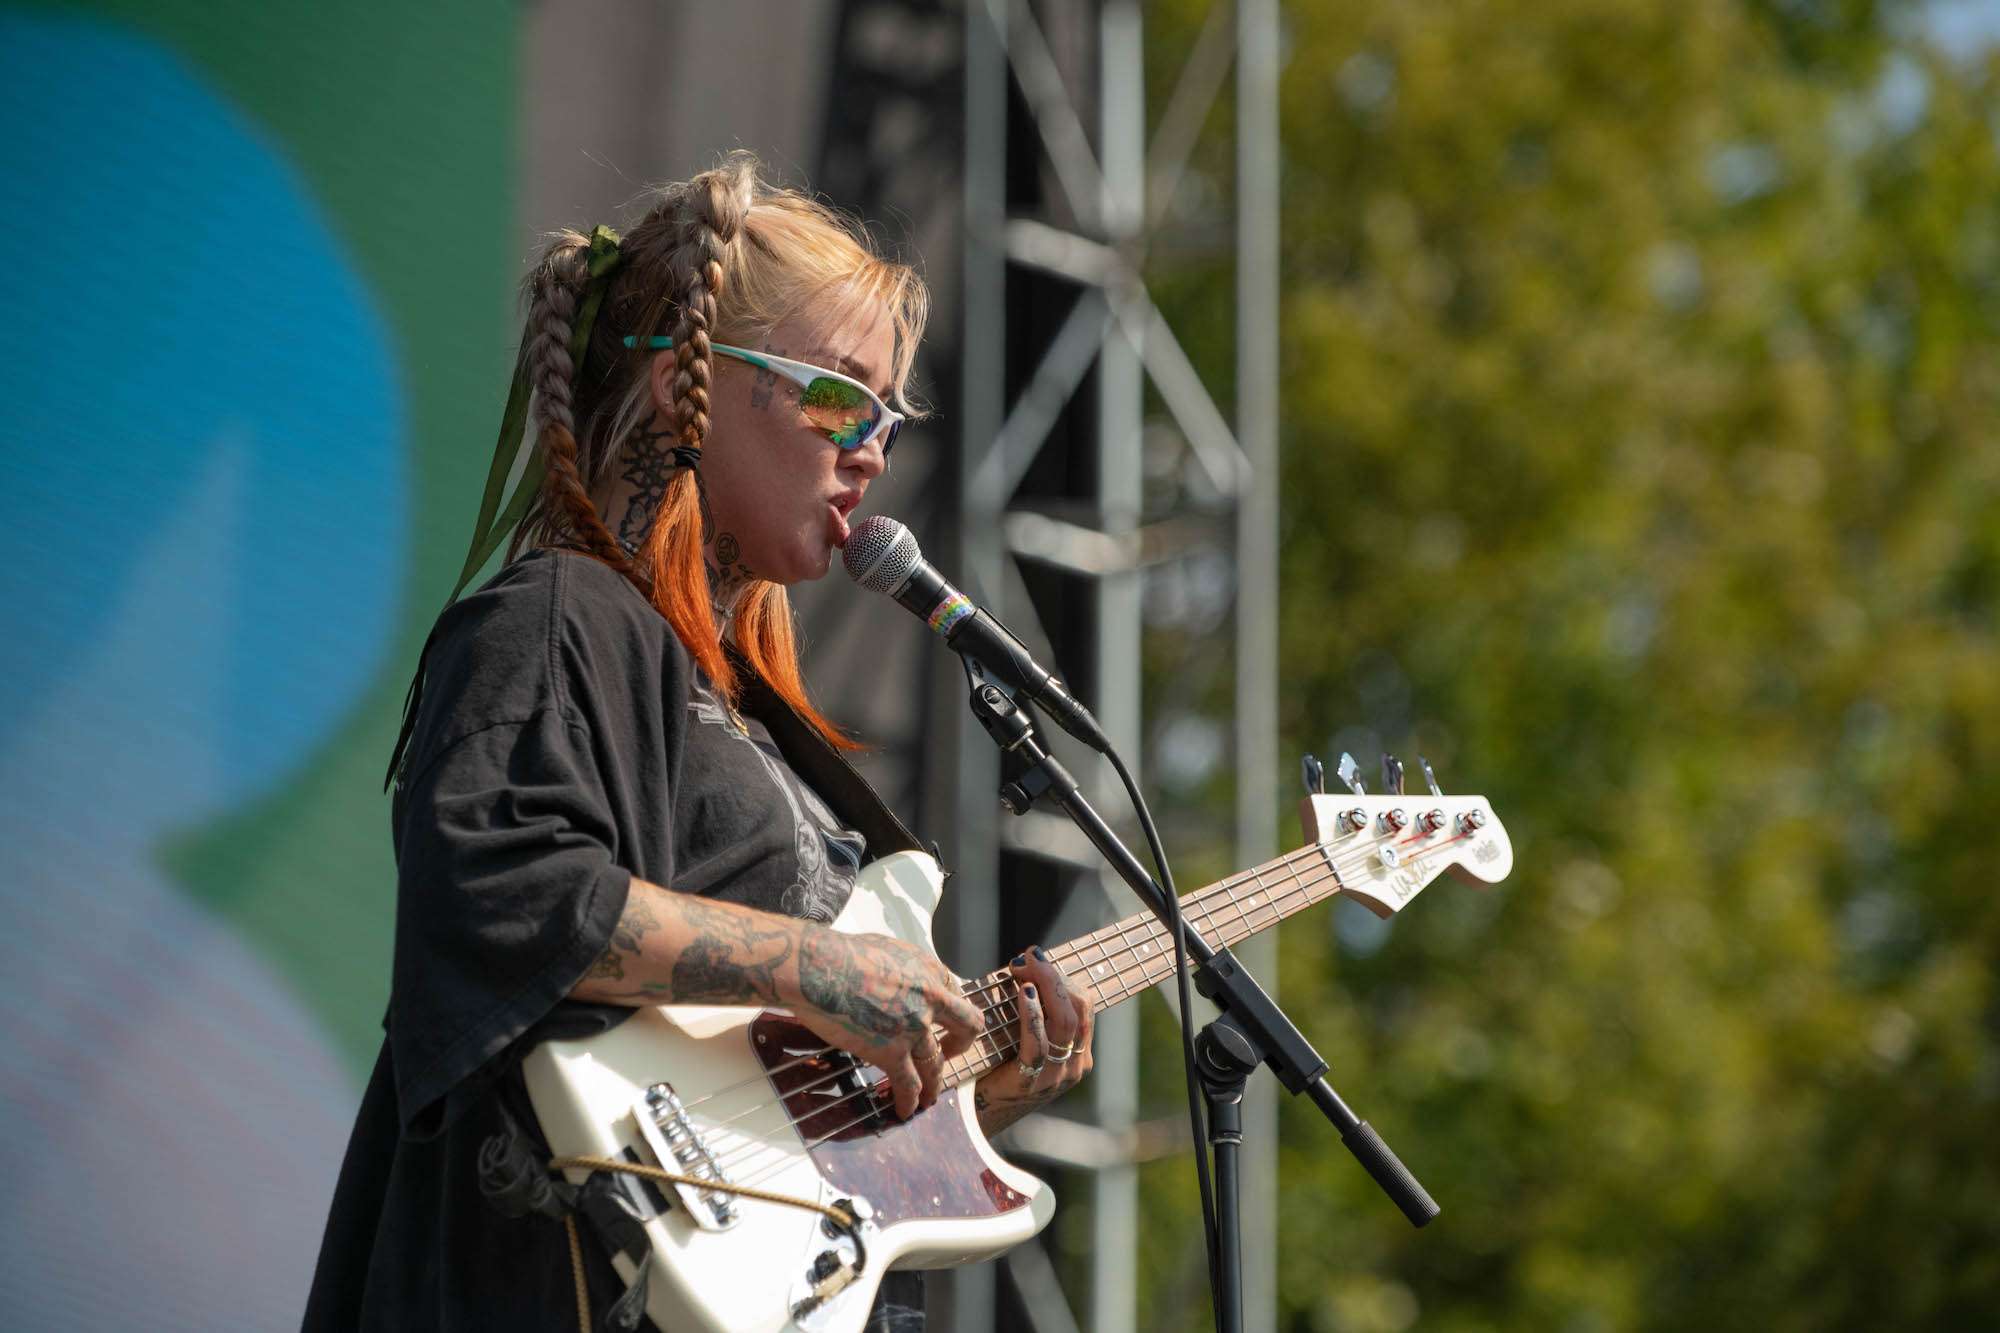 DEHD Live at Pitchfork [GALLERY] 5